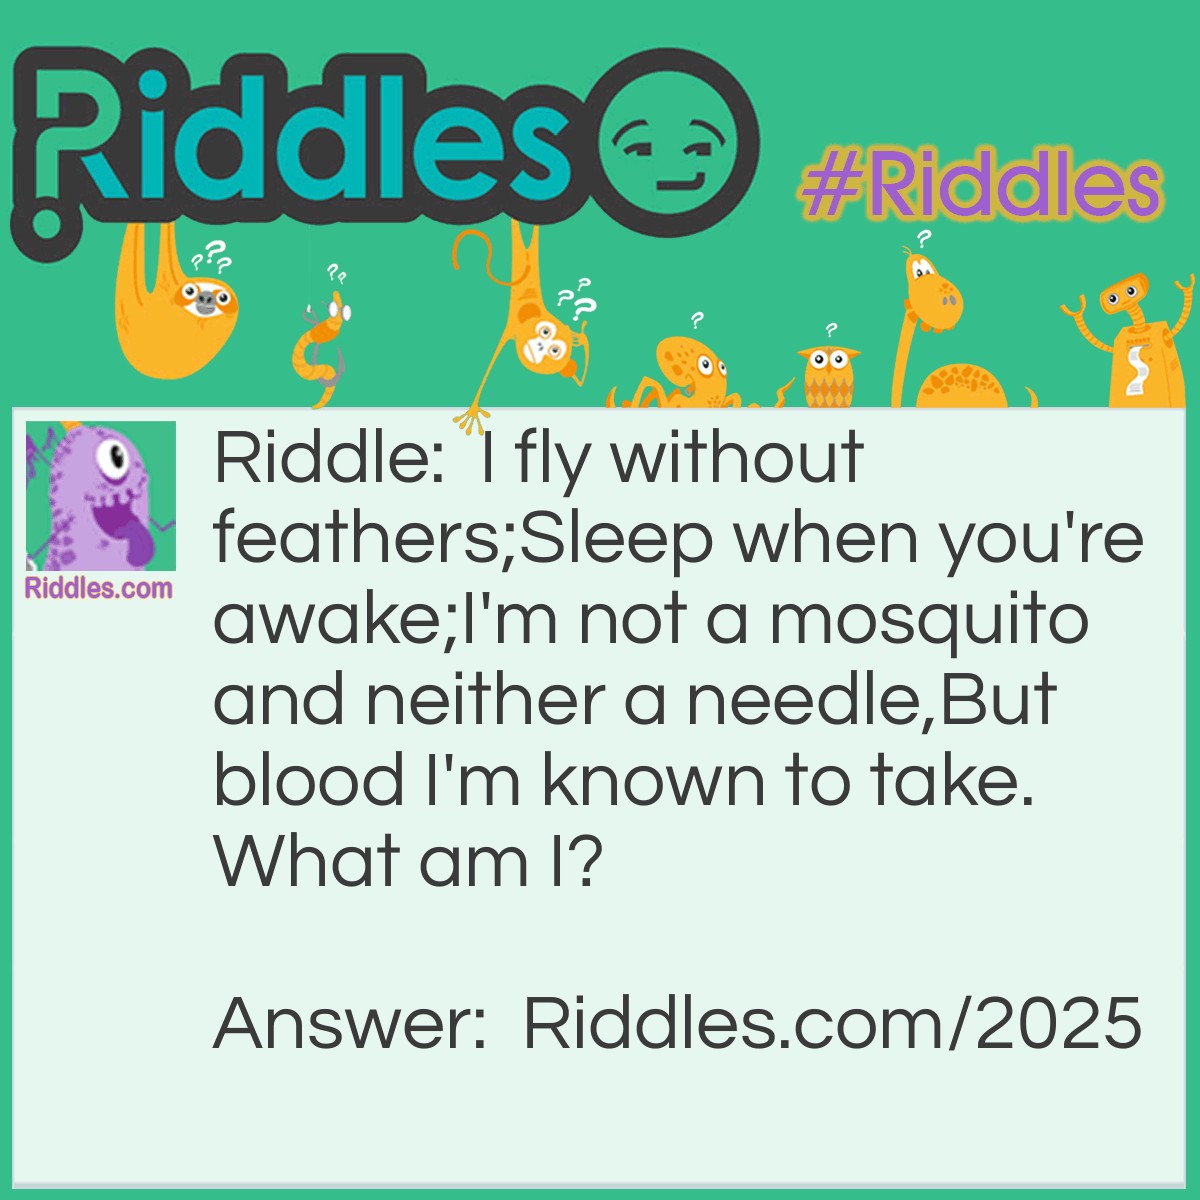 Riddle: I fly without feathers;
Sleep when you're awake;
I'm not a mosquito and neither a needle,
But blood I'm known to take.
What am I? Answer: I am a vampire bat.